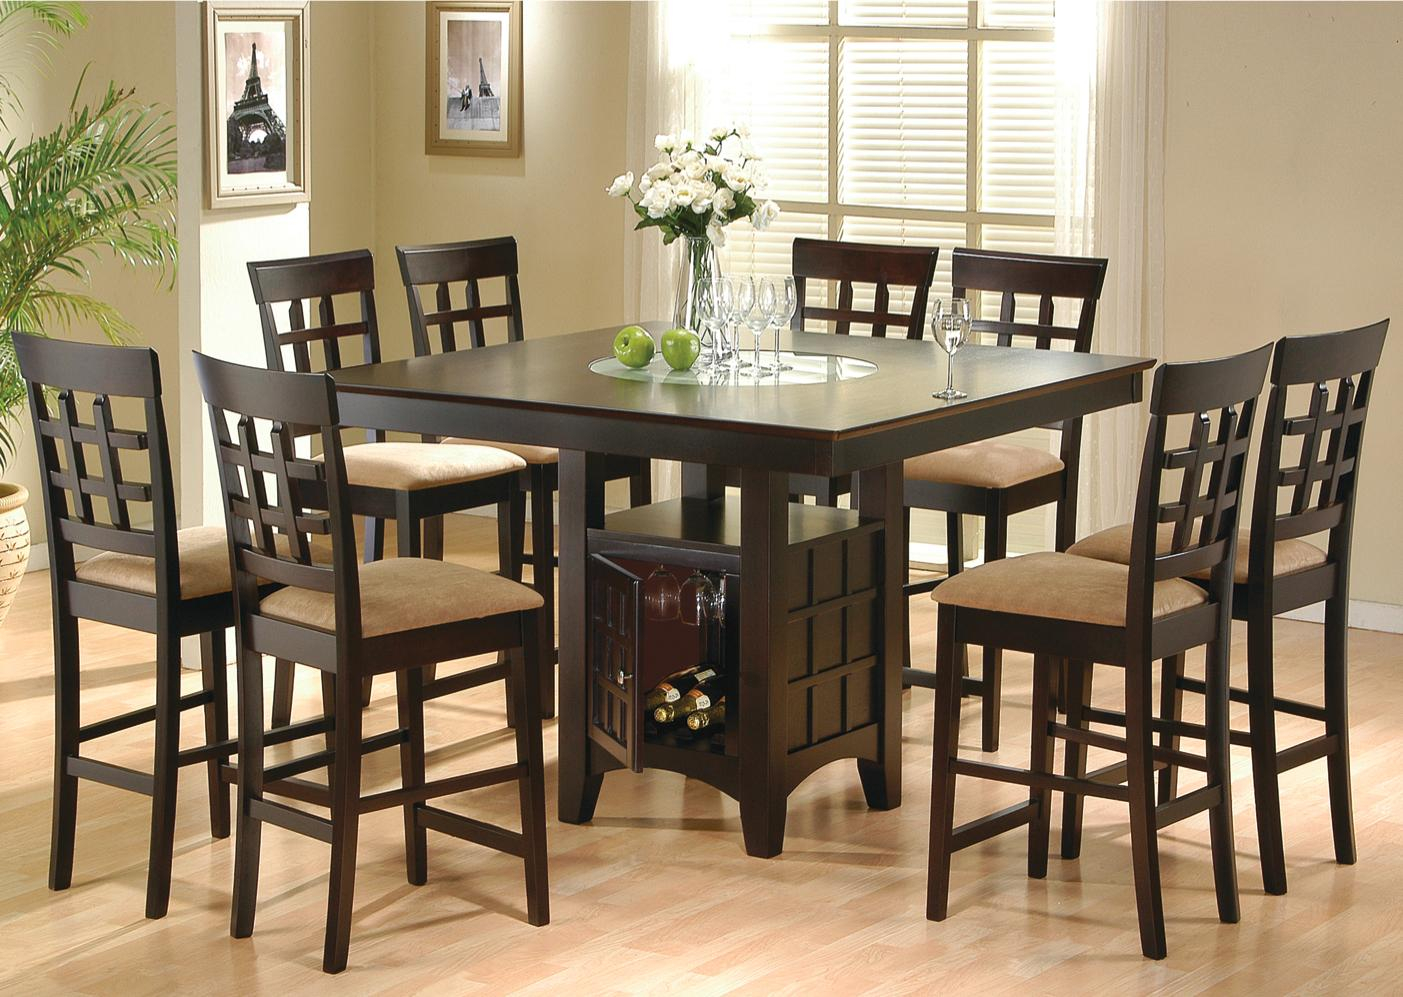 Dining Room Chairs And Matching Bar Stools • Faucet Ideas Site